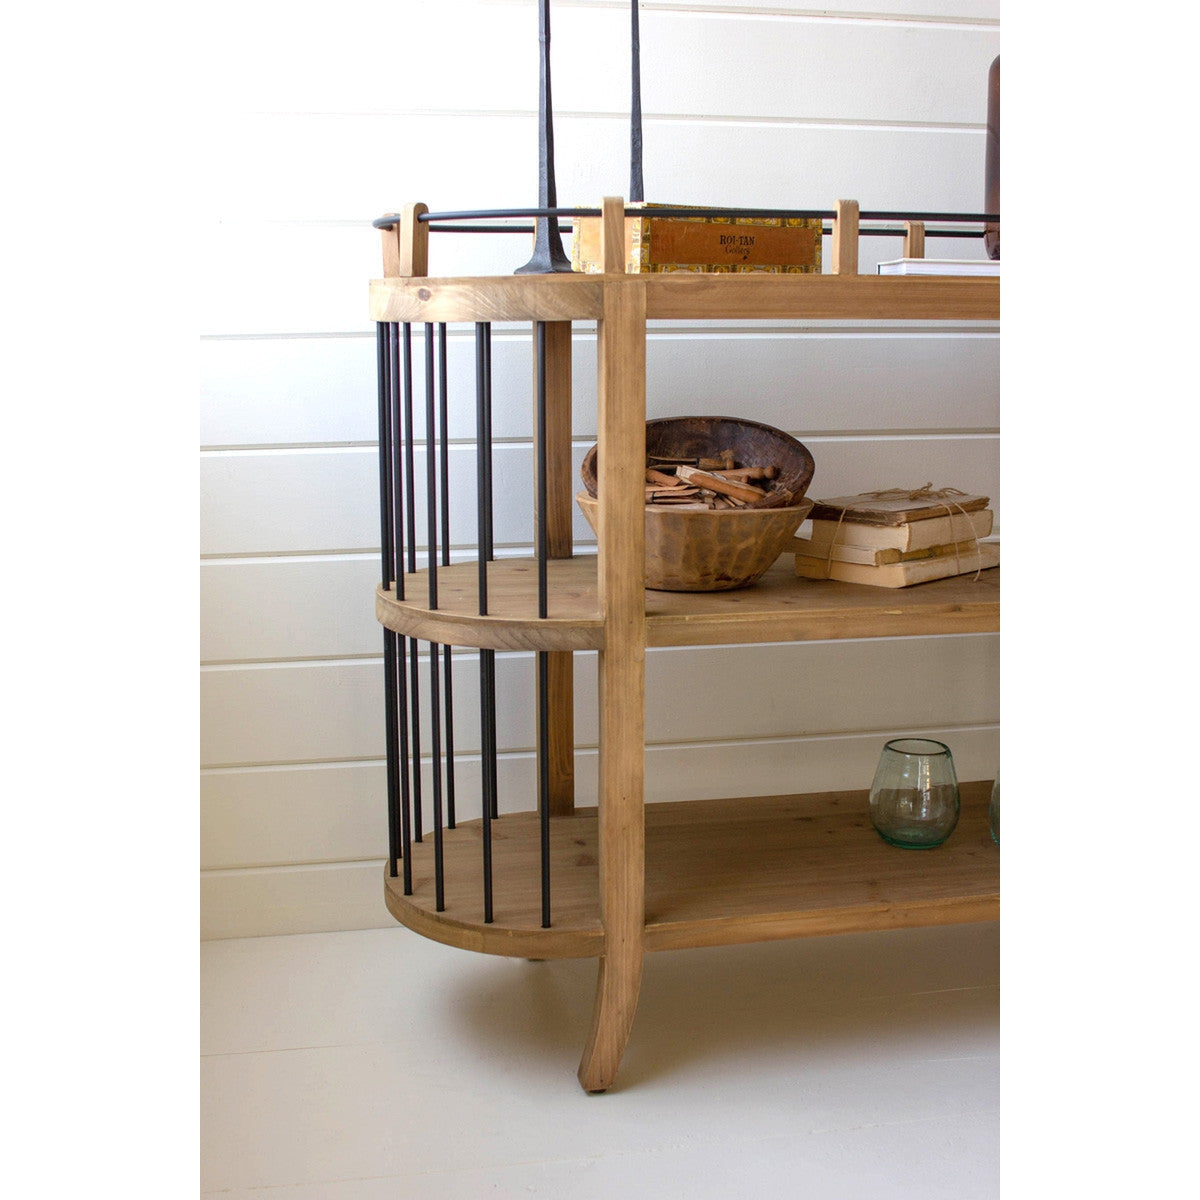 Oval Three-Tiered Wooden Shelving Unit